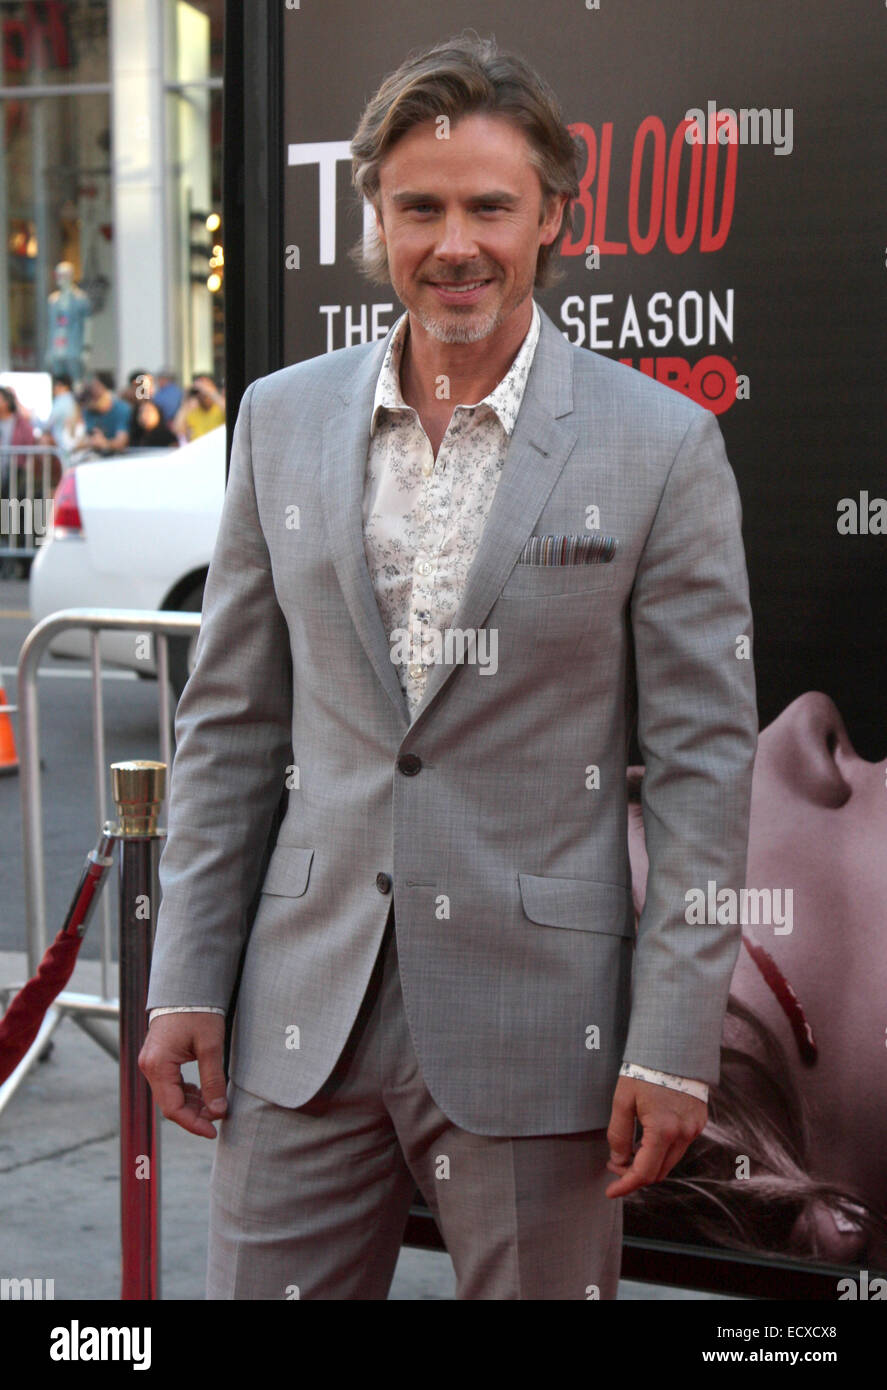 Final season premiere of HBO's 'True Blood' - Arrivals  Featuring: Sam Trammell Where: Los Angeles, California, United States When: 17 Jun 2014 Stock Photo